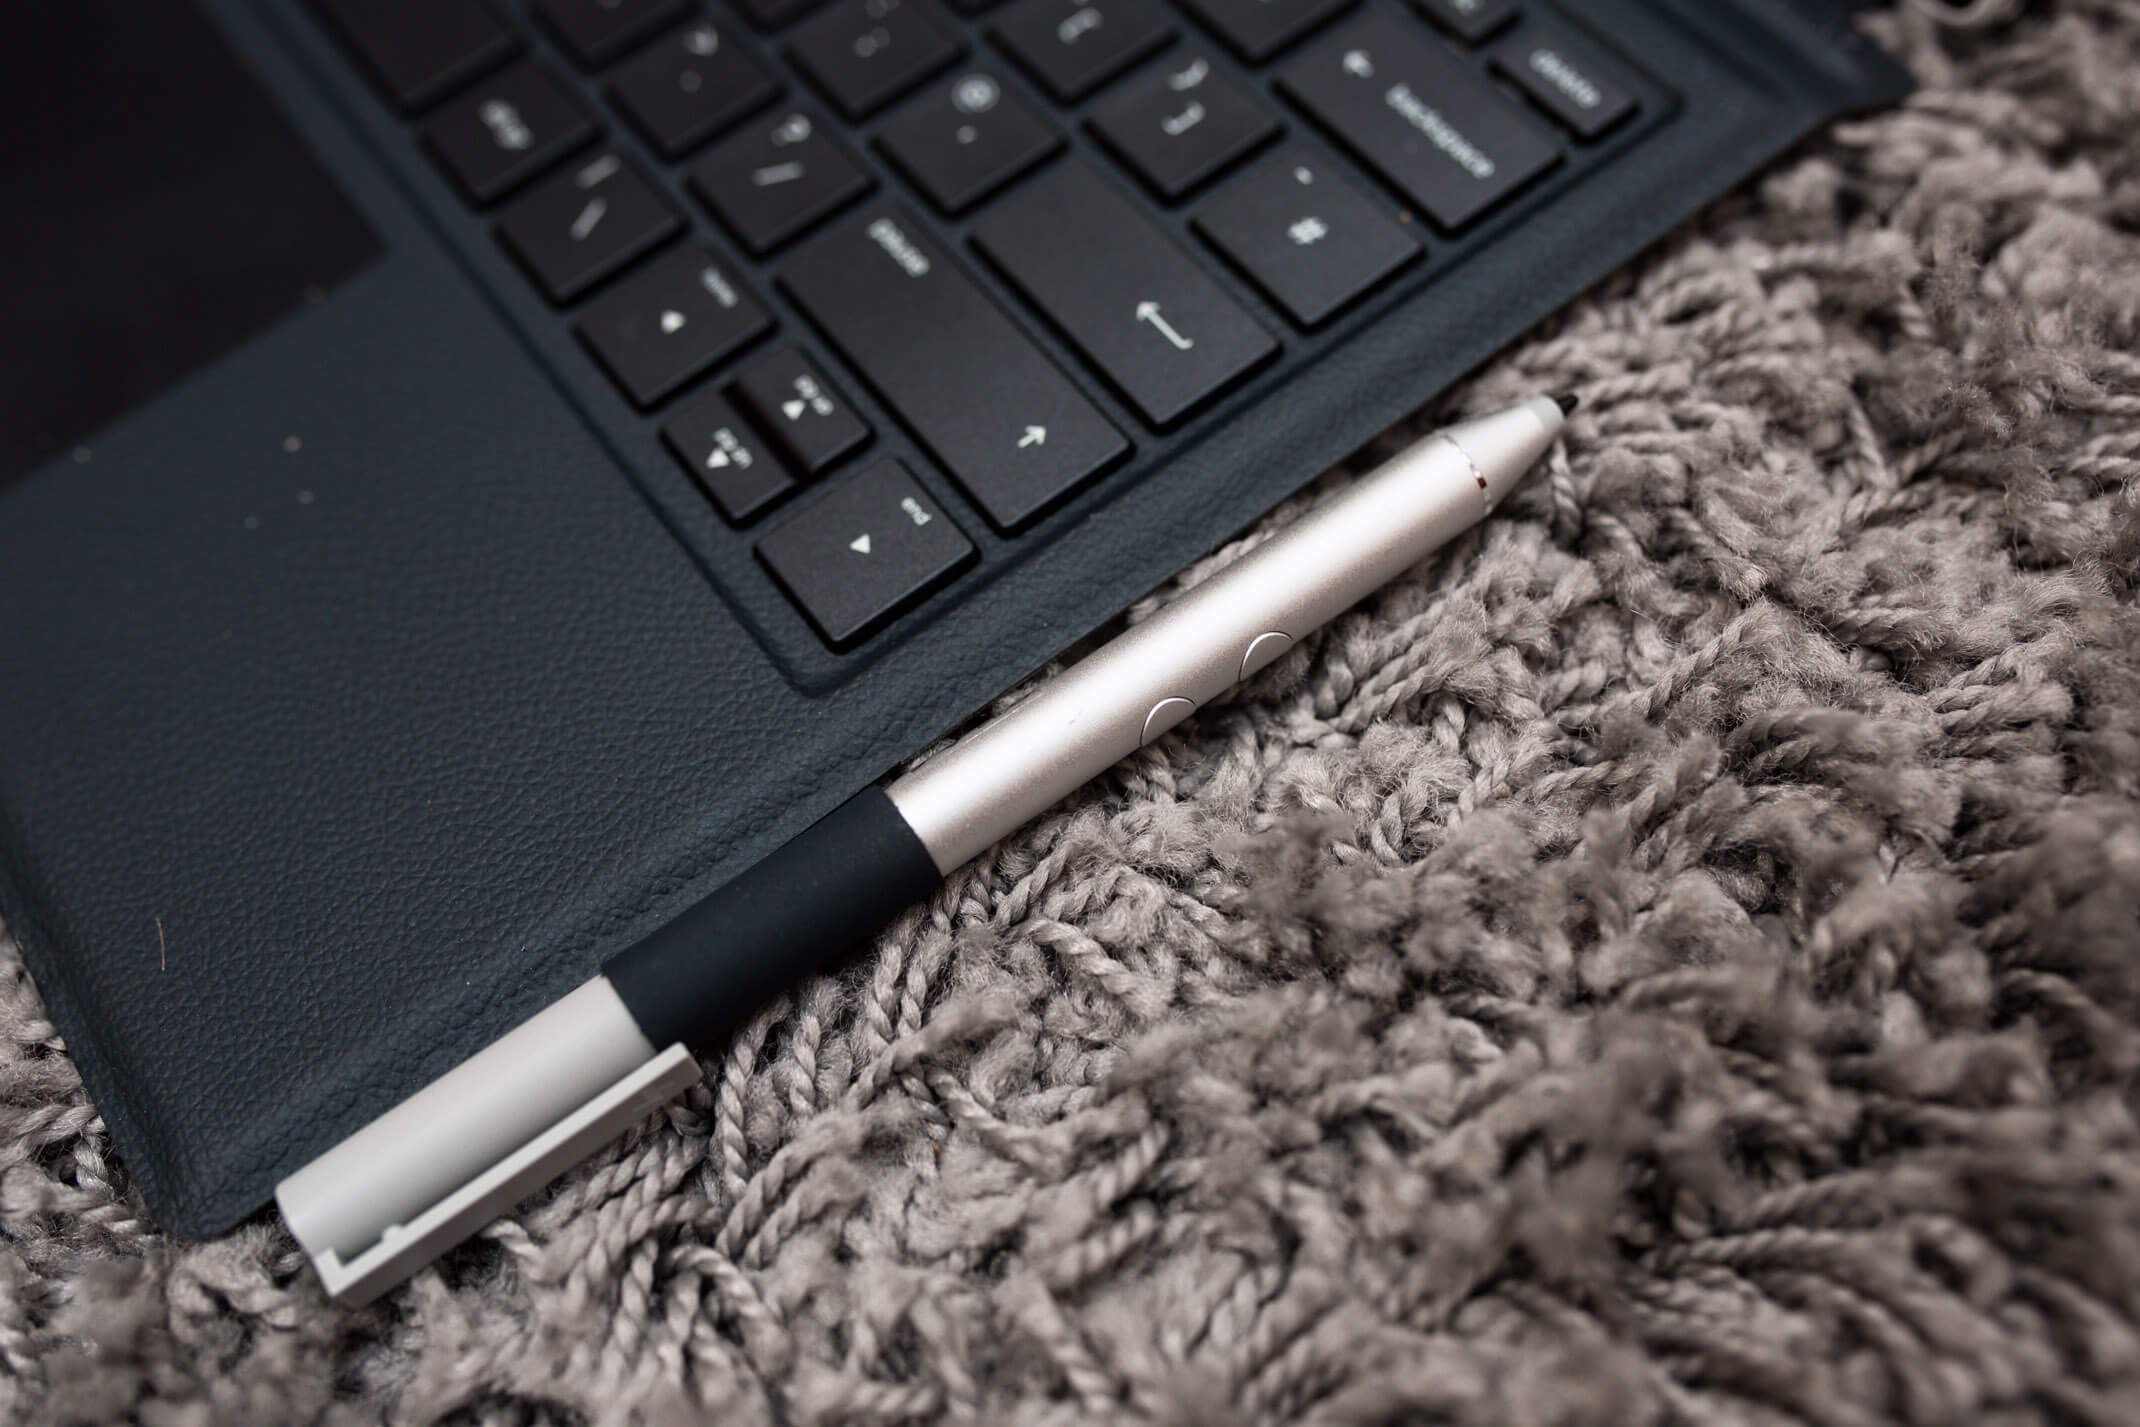 Review: HP Envy X2 - The ideal tablet for travelling (powered by Microsoft Windows)